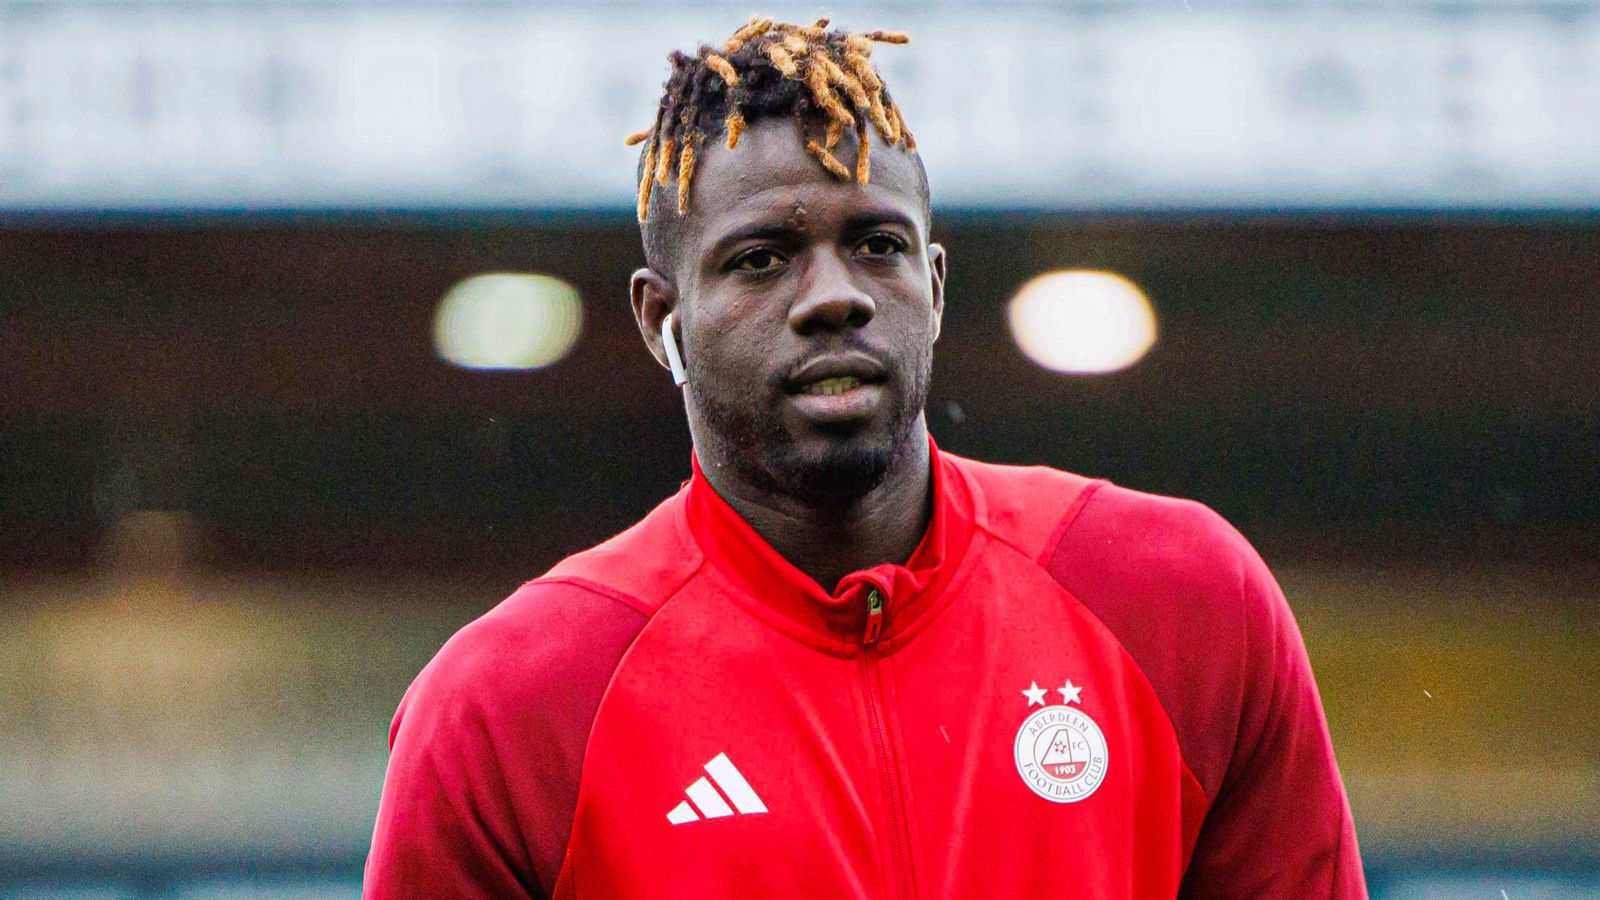 Aberdeen: Pape Habib Gueye racism allegation to be investigated by UEFA following Conference League match | Football News